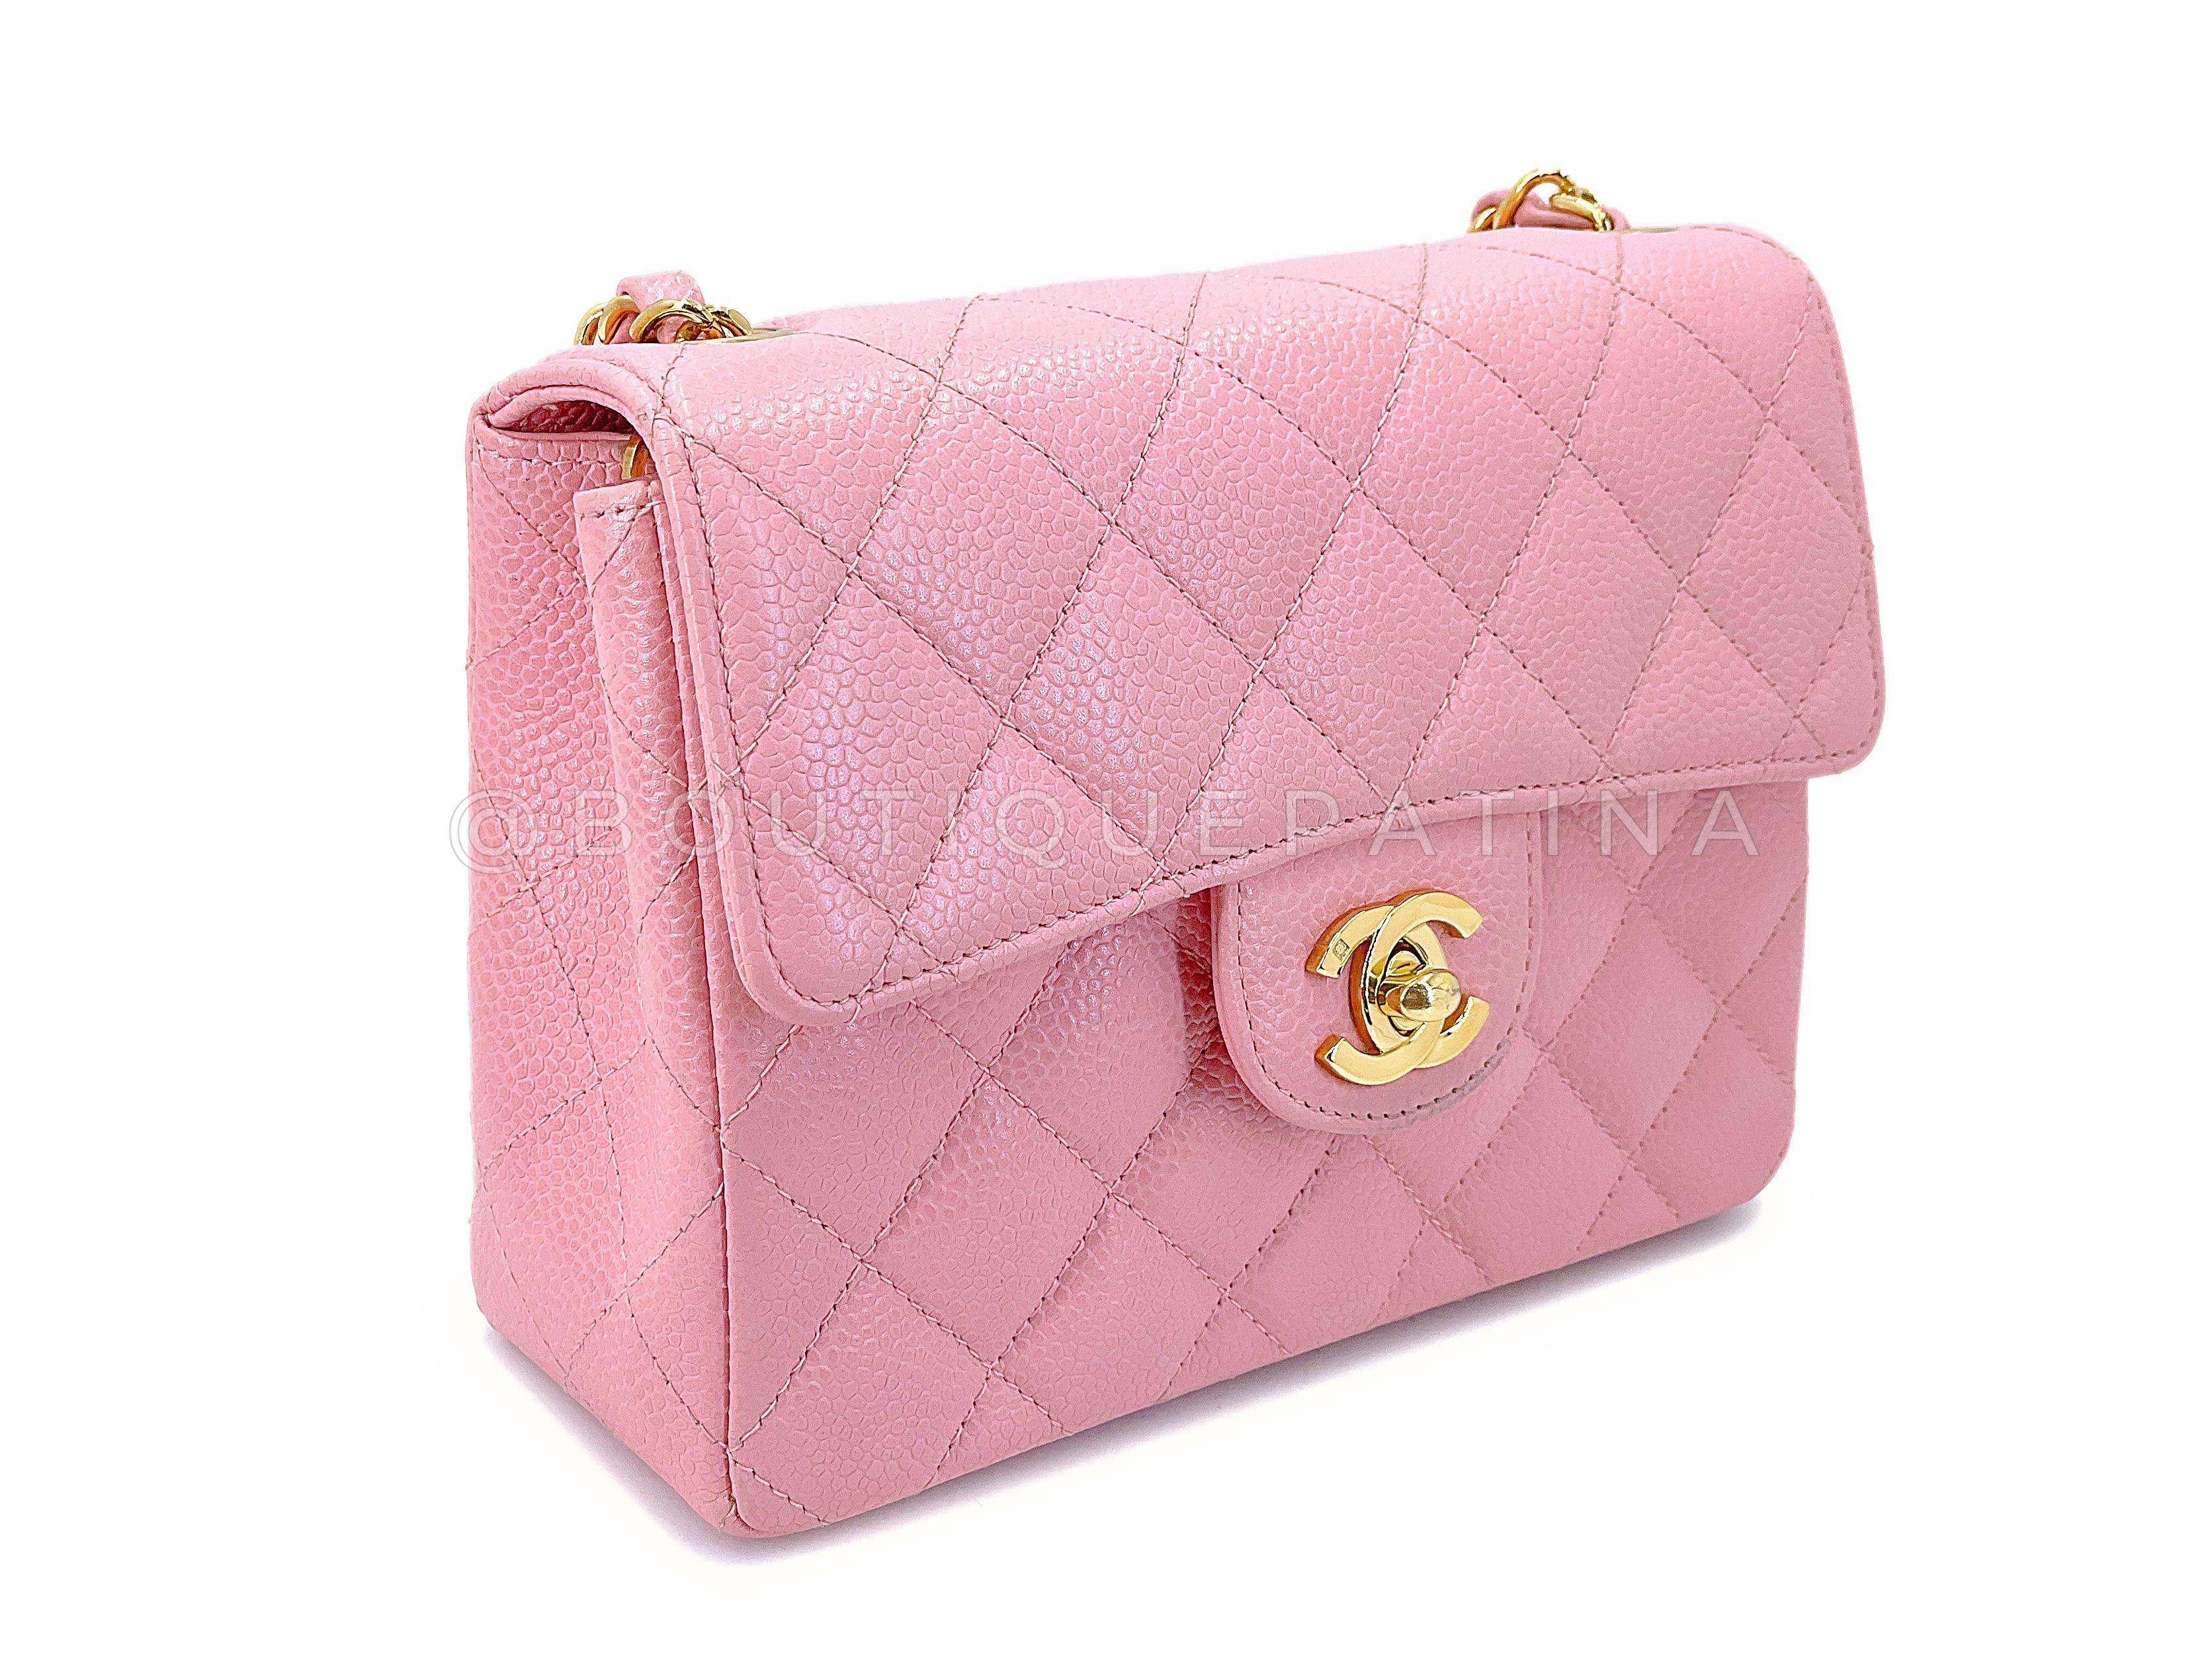 Chanel 2004 Vintage Sakura Pink Square Mini Flap Bag 24k GHW 67727 In Excellent Condition For Sale In Costa Mesa, CA